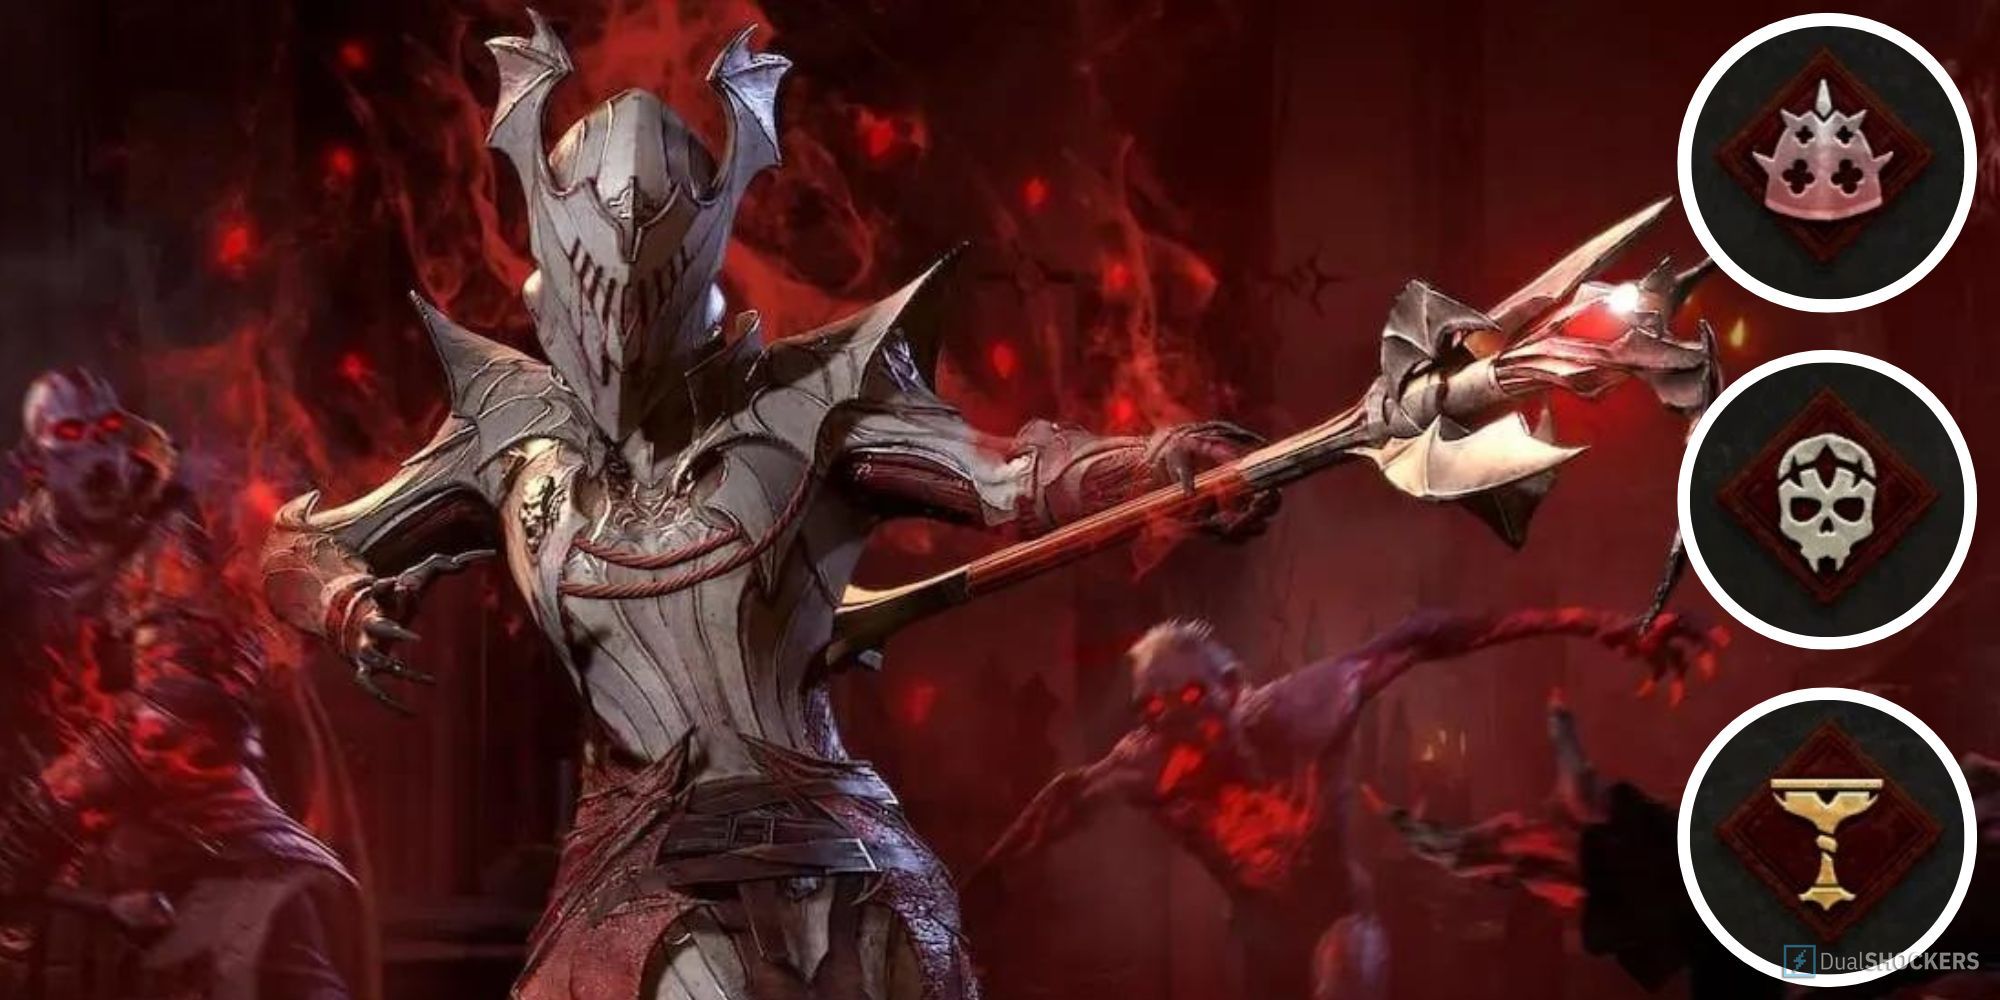 A player character wearing the Season of blood armor, pointing at the icons for the three different Vampiric Pacts